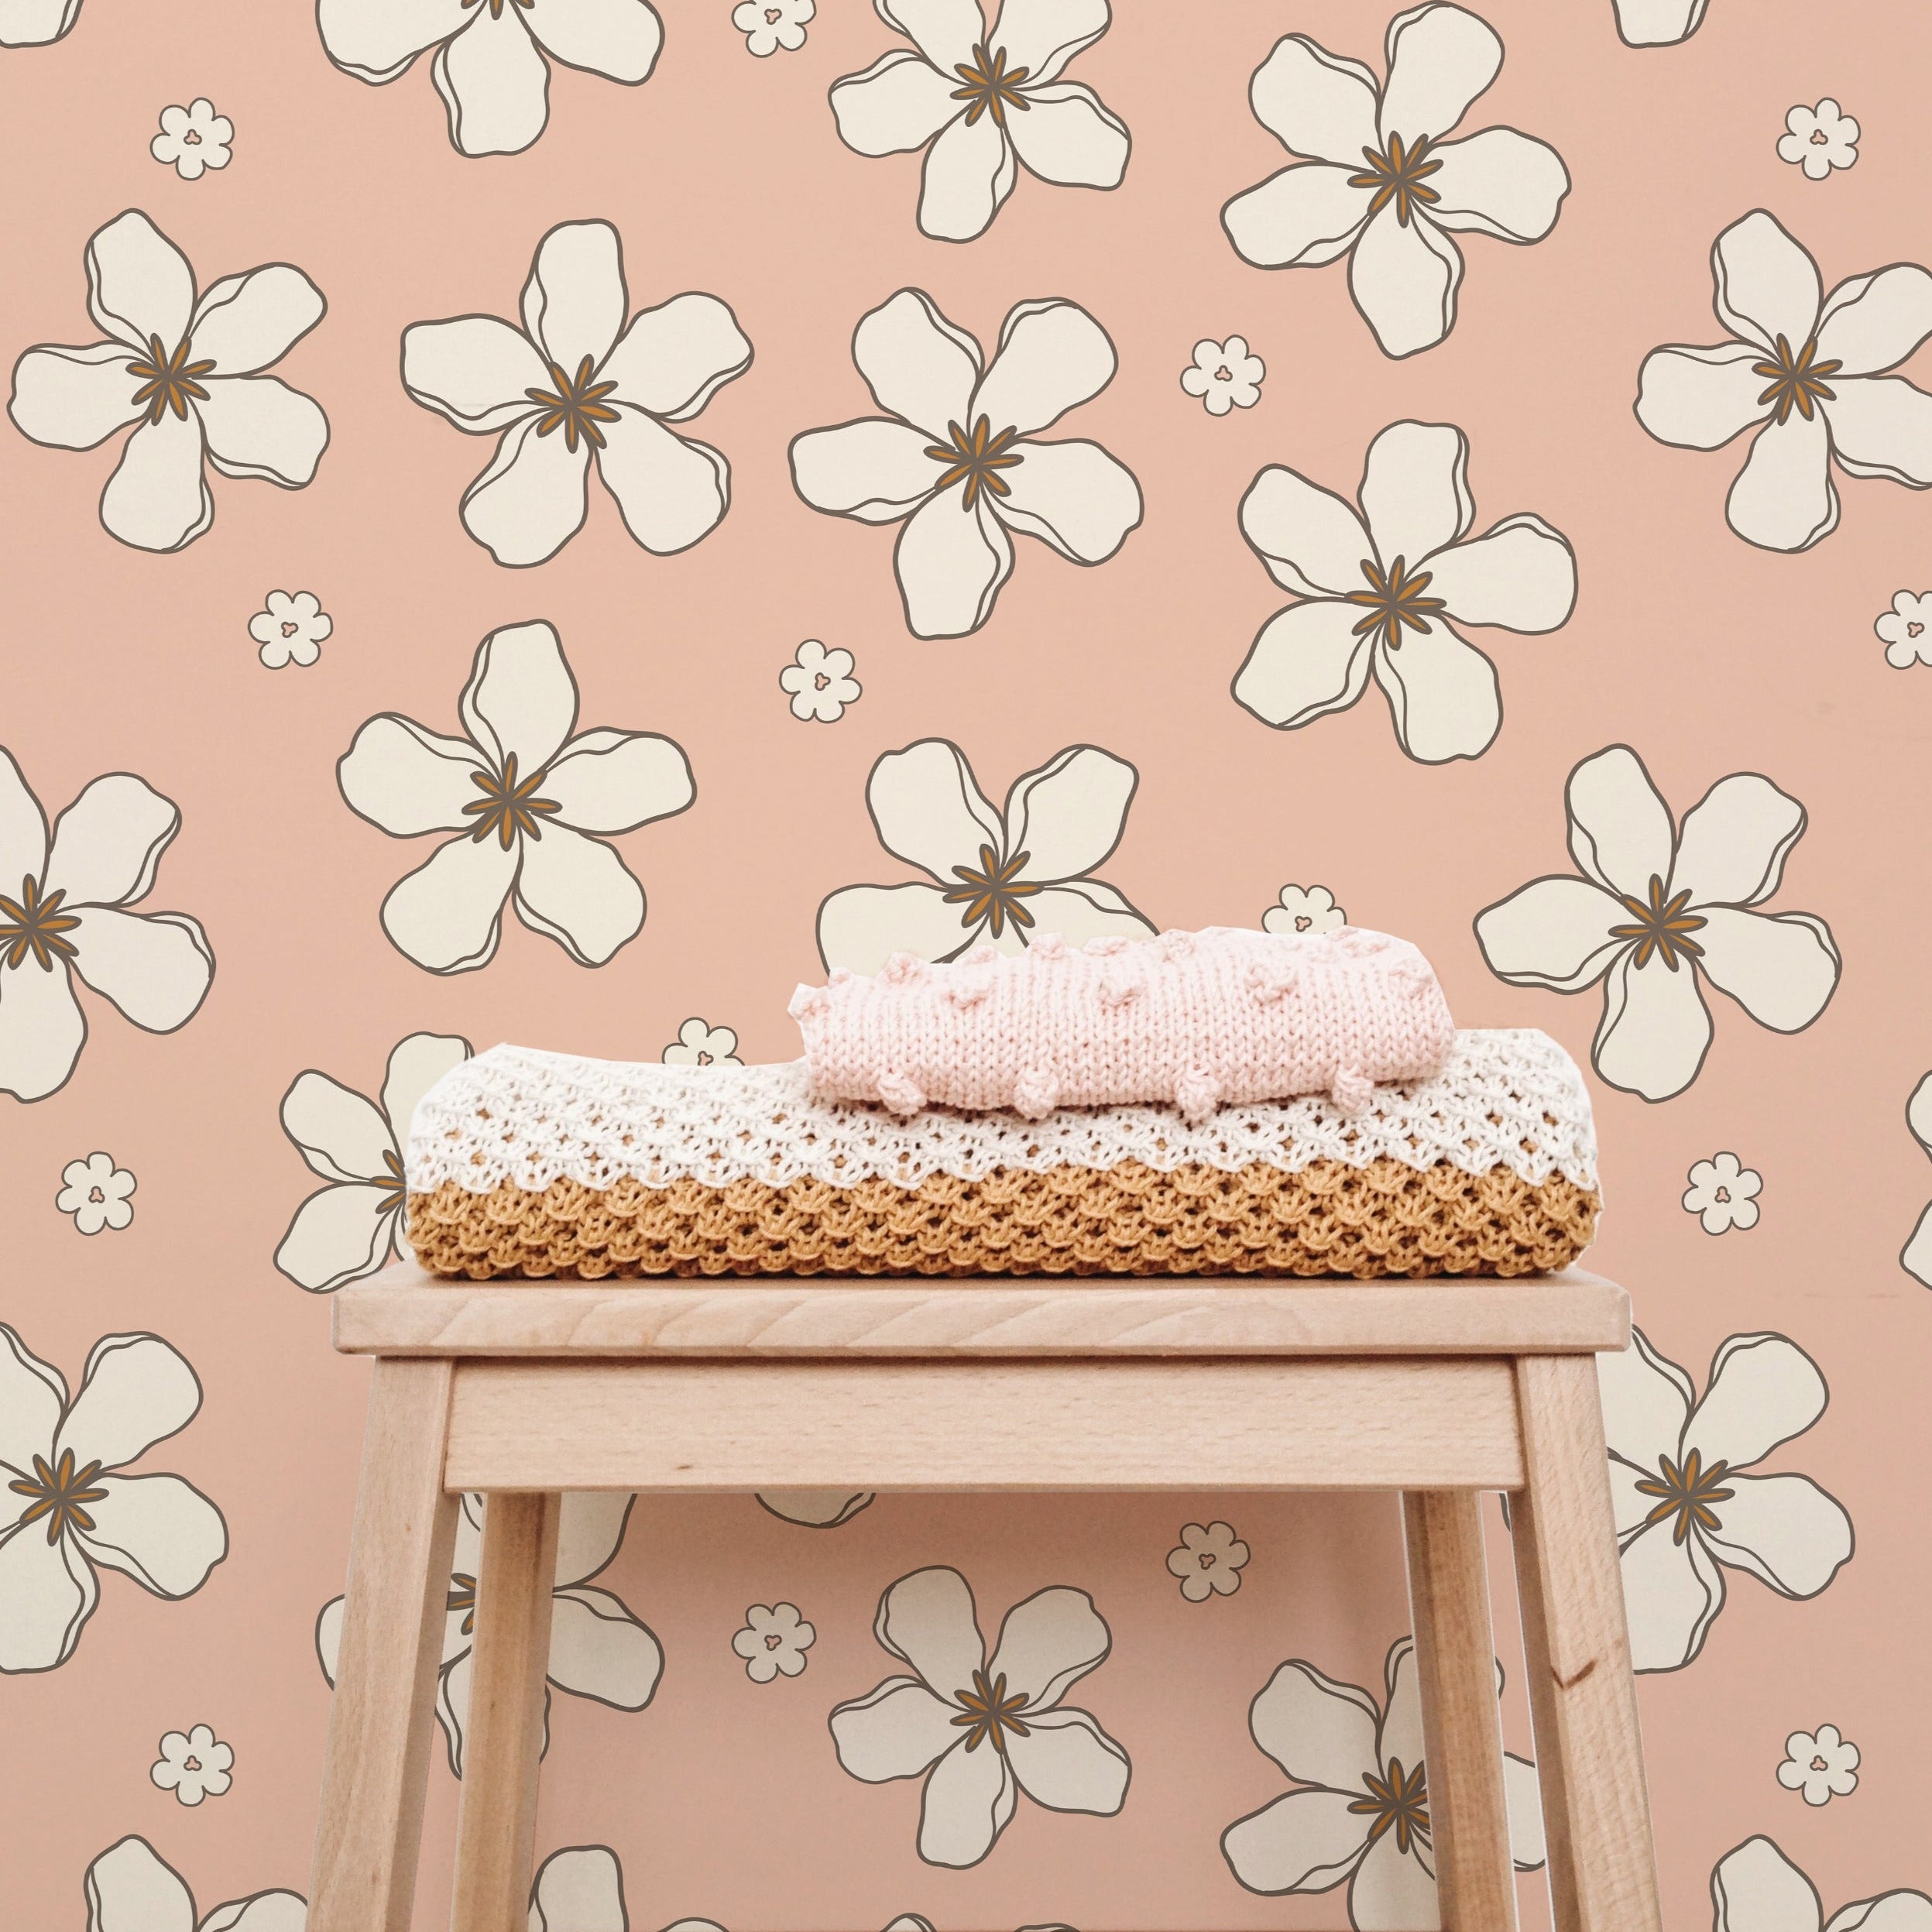 A cozy corner showcasing the Retro Pink Flowers Wallpaper, which enhances the space with its large white floral designs on a pink background, accompanied by a wooden stool topped with crocheted items.